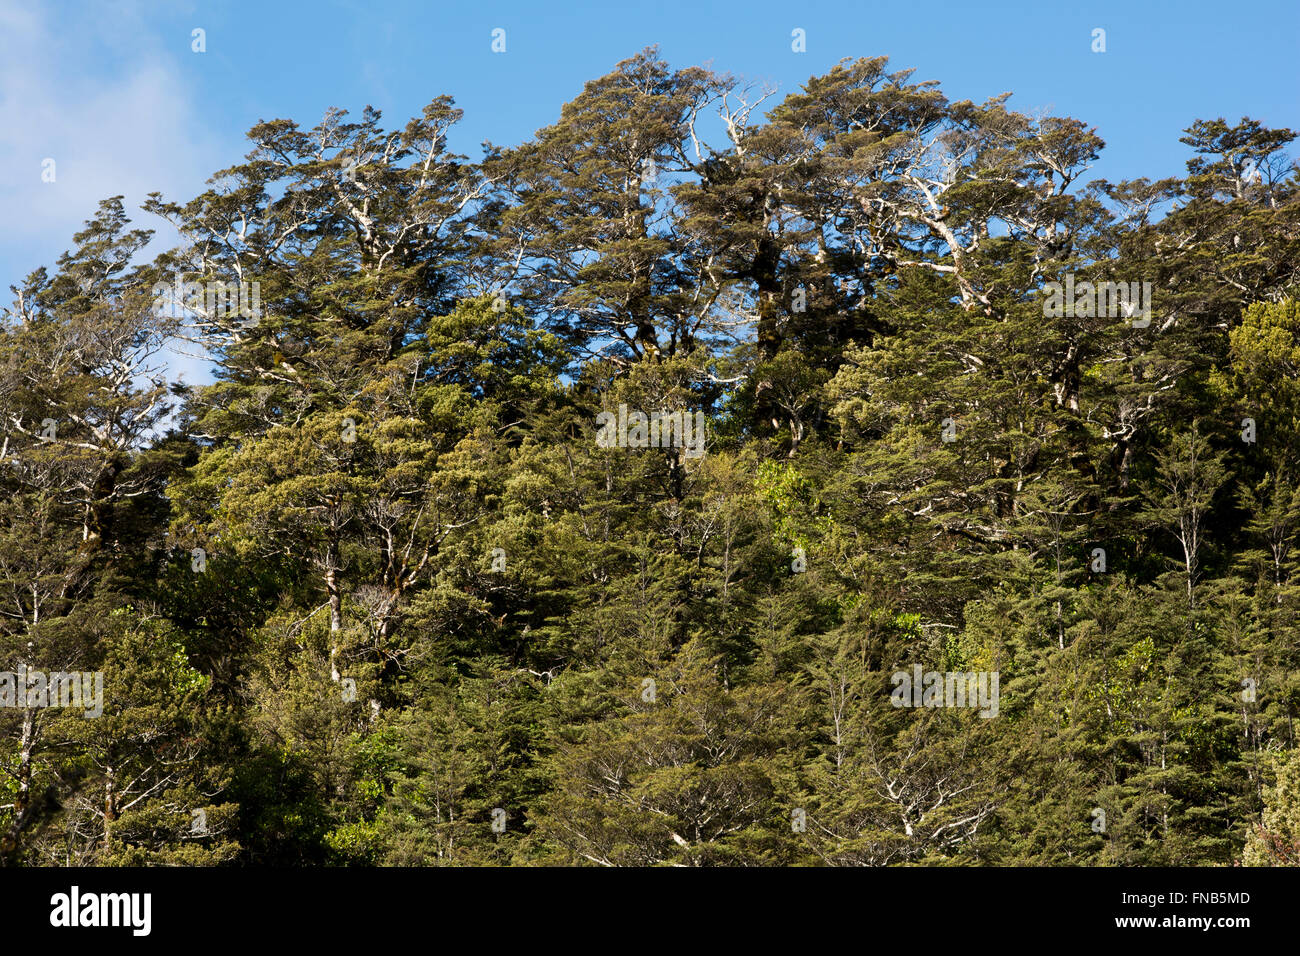 Old grown Southern Beech forest covers parts of the Tongariro National Park at the slopes of Mount Ruapehu  in New Zealand. Stock Photo